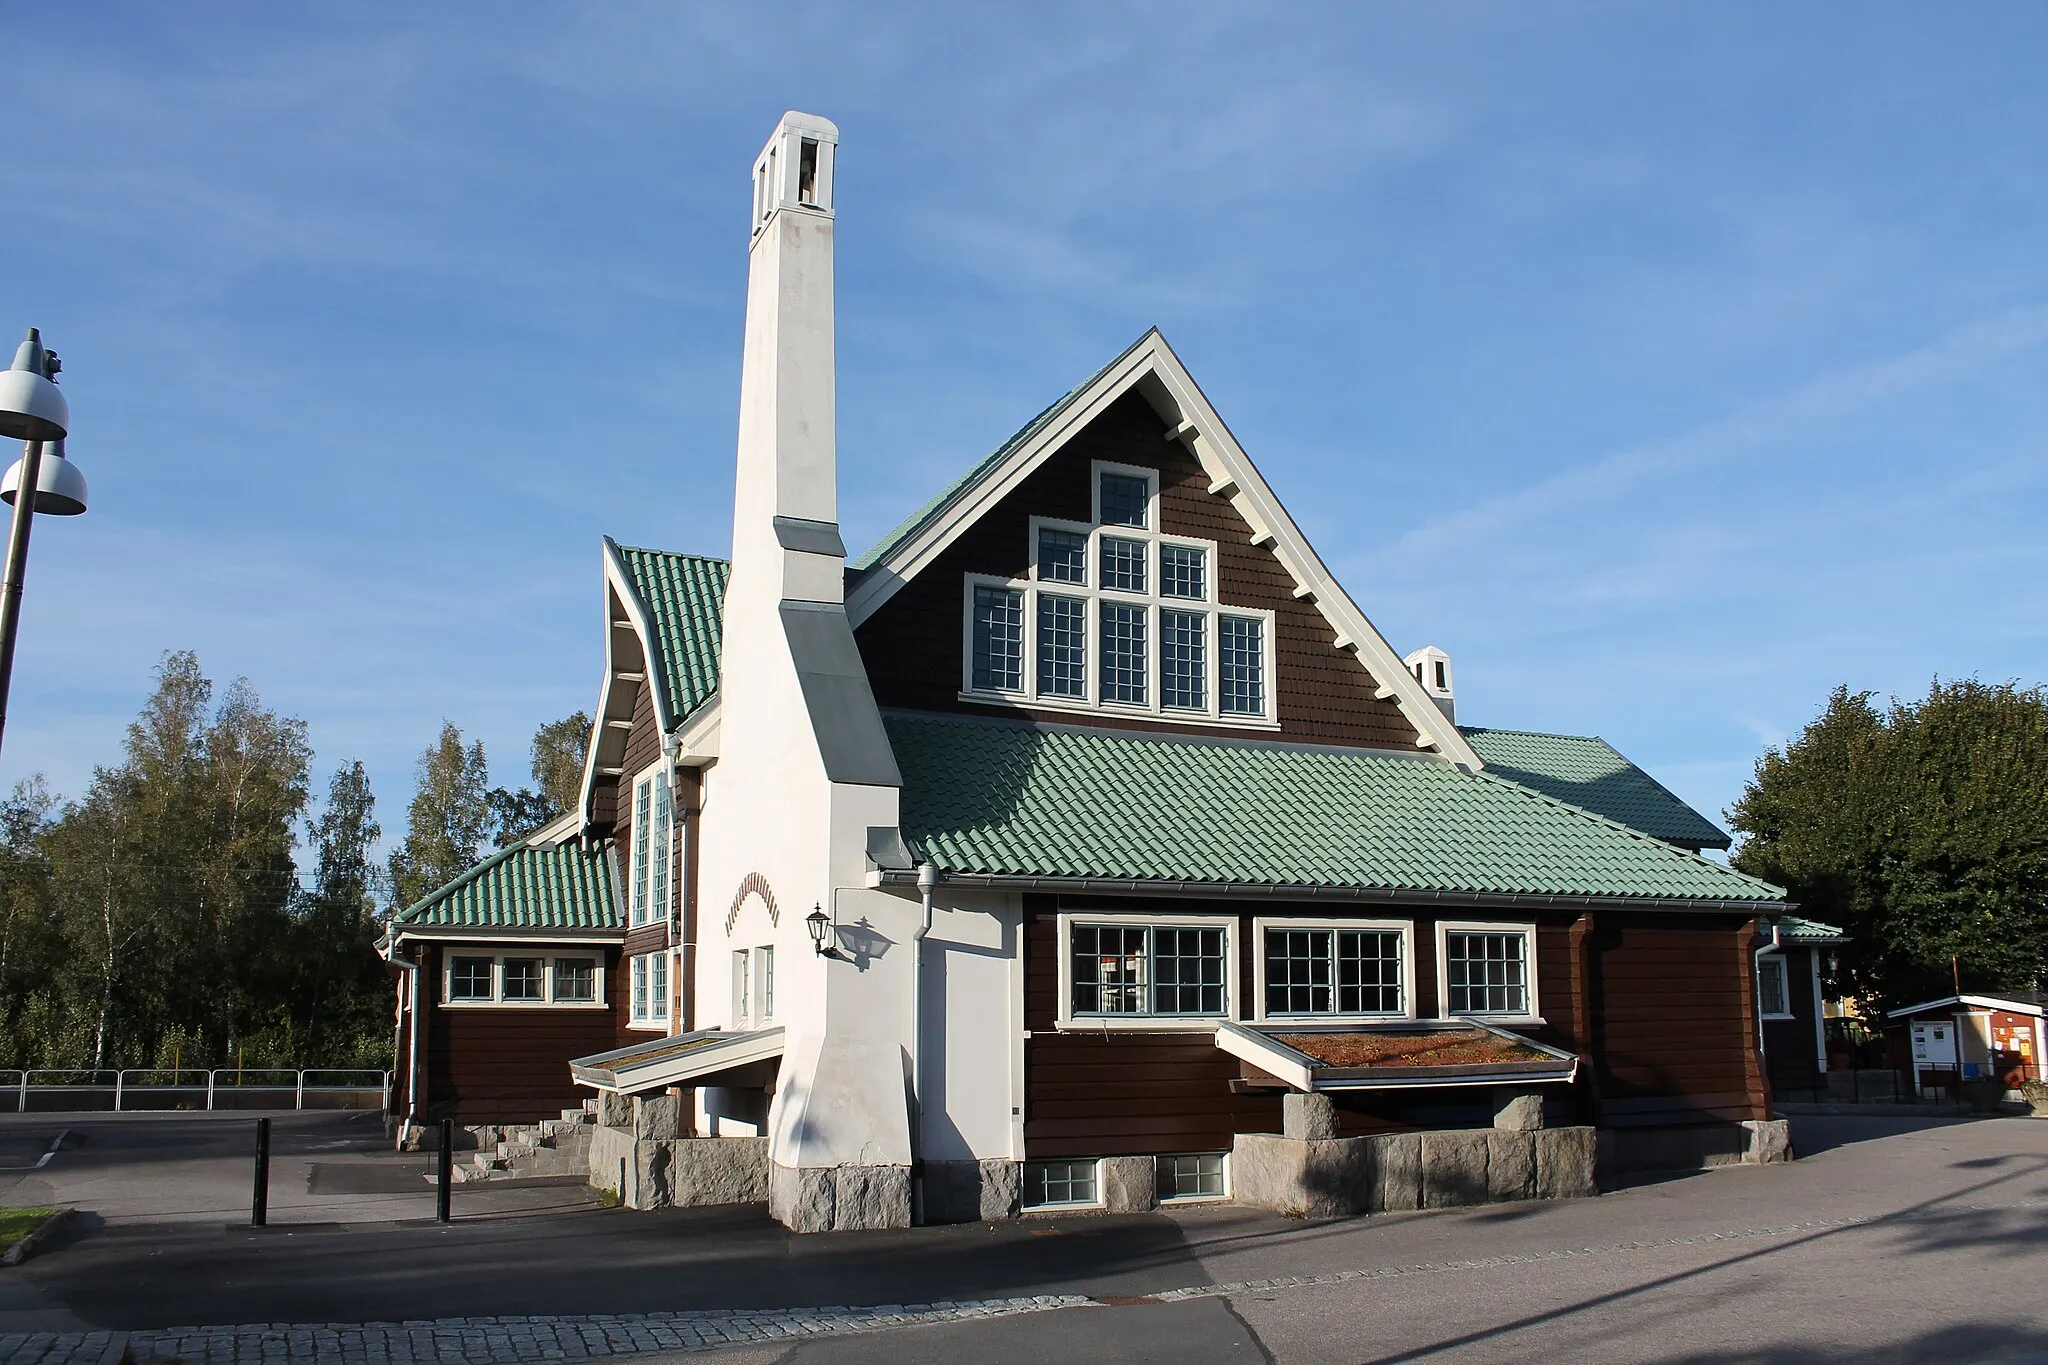 Photo showing: Hindås railway station building in national romantic style. Härryda municipality, Sweden